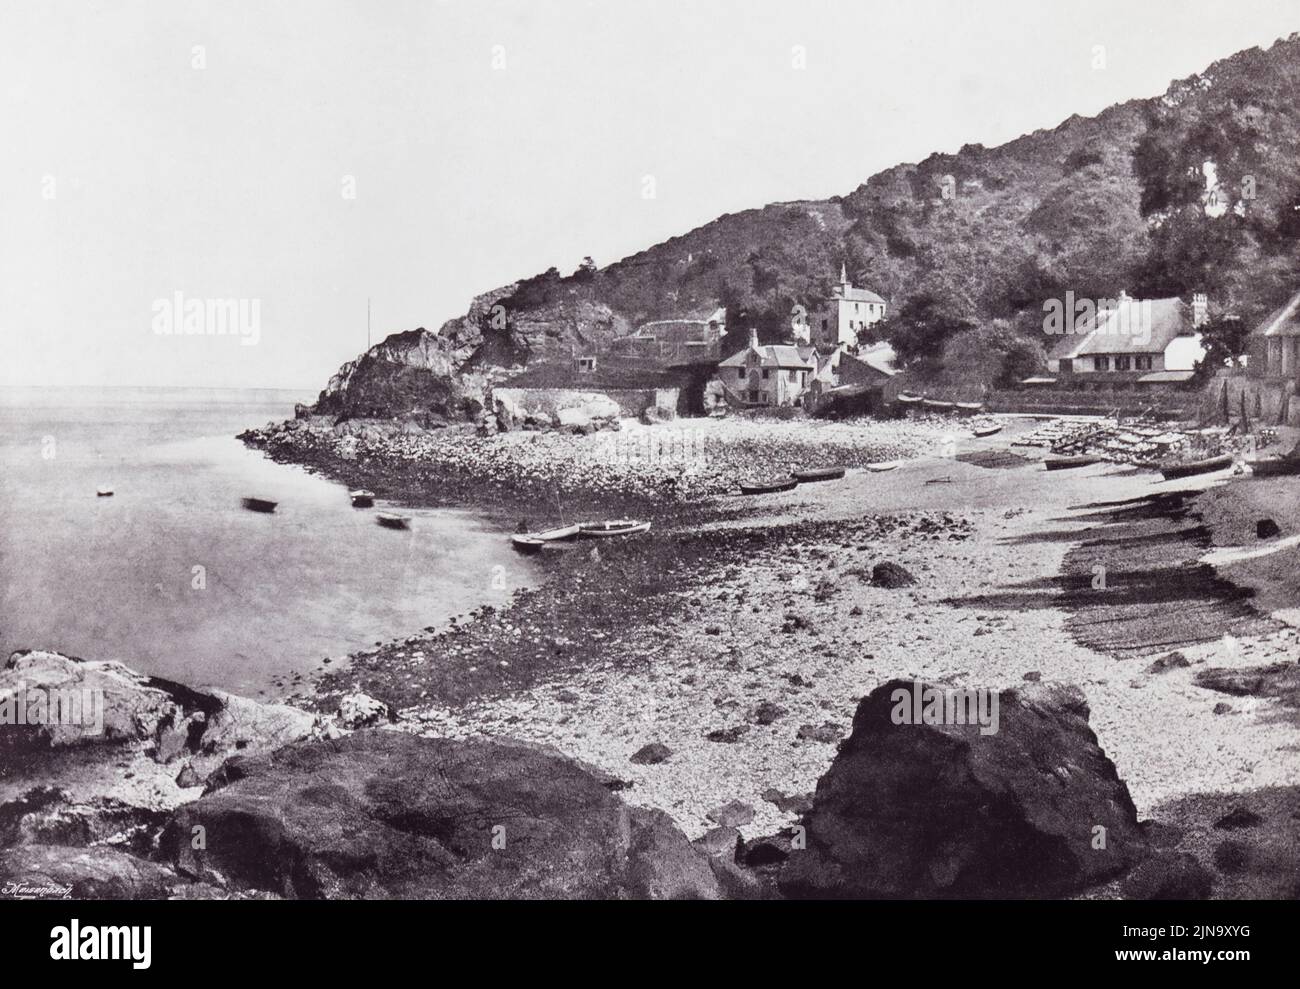 Torquay, Devon, England.  The beach at Babbicombe, seen here in the 19th century.  From Around The Coast,  An Album of Pictures from Photographs of the Chief Seaside Places of Interest in Great Britain and Ireland published London, 1895, by George Newnes Limited. Stock Photo